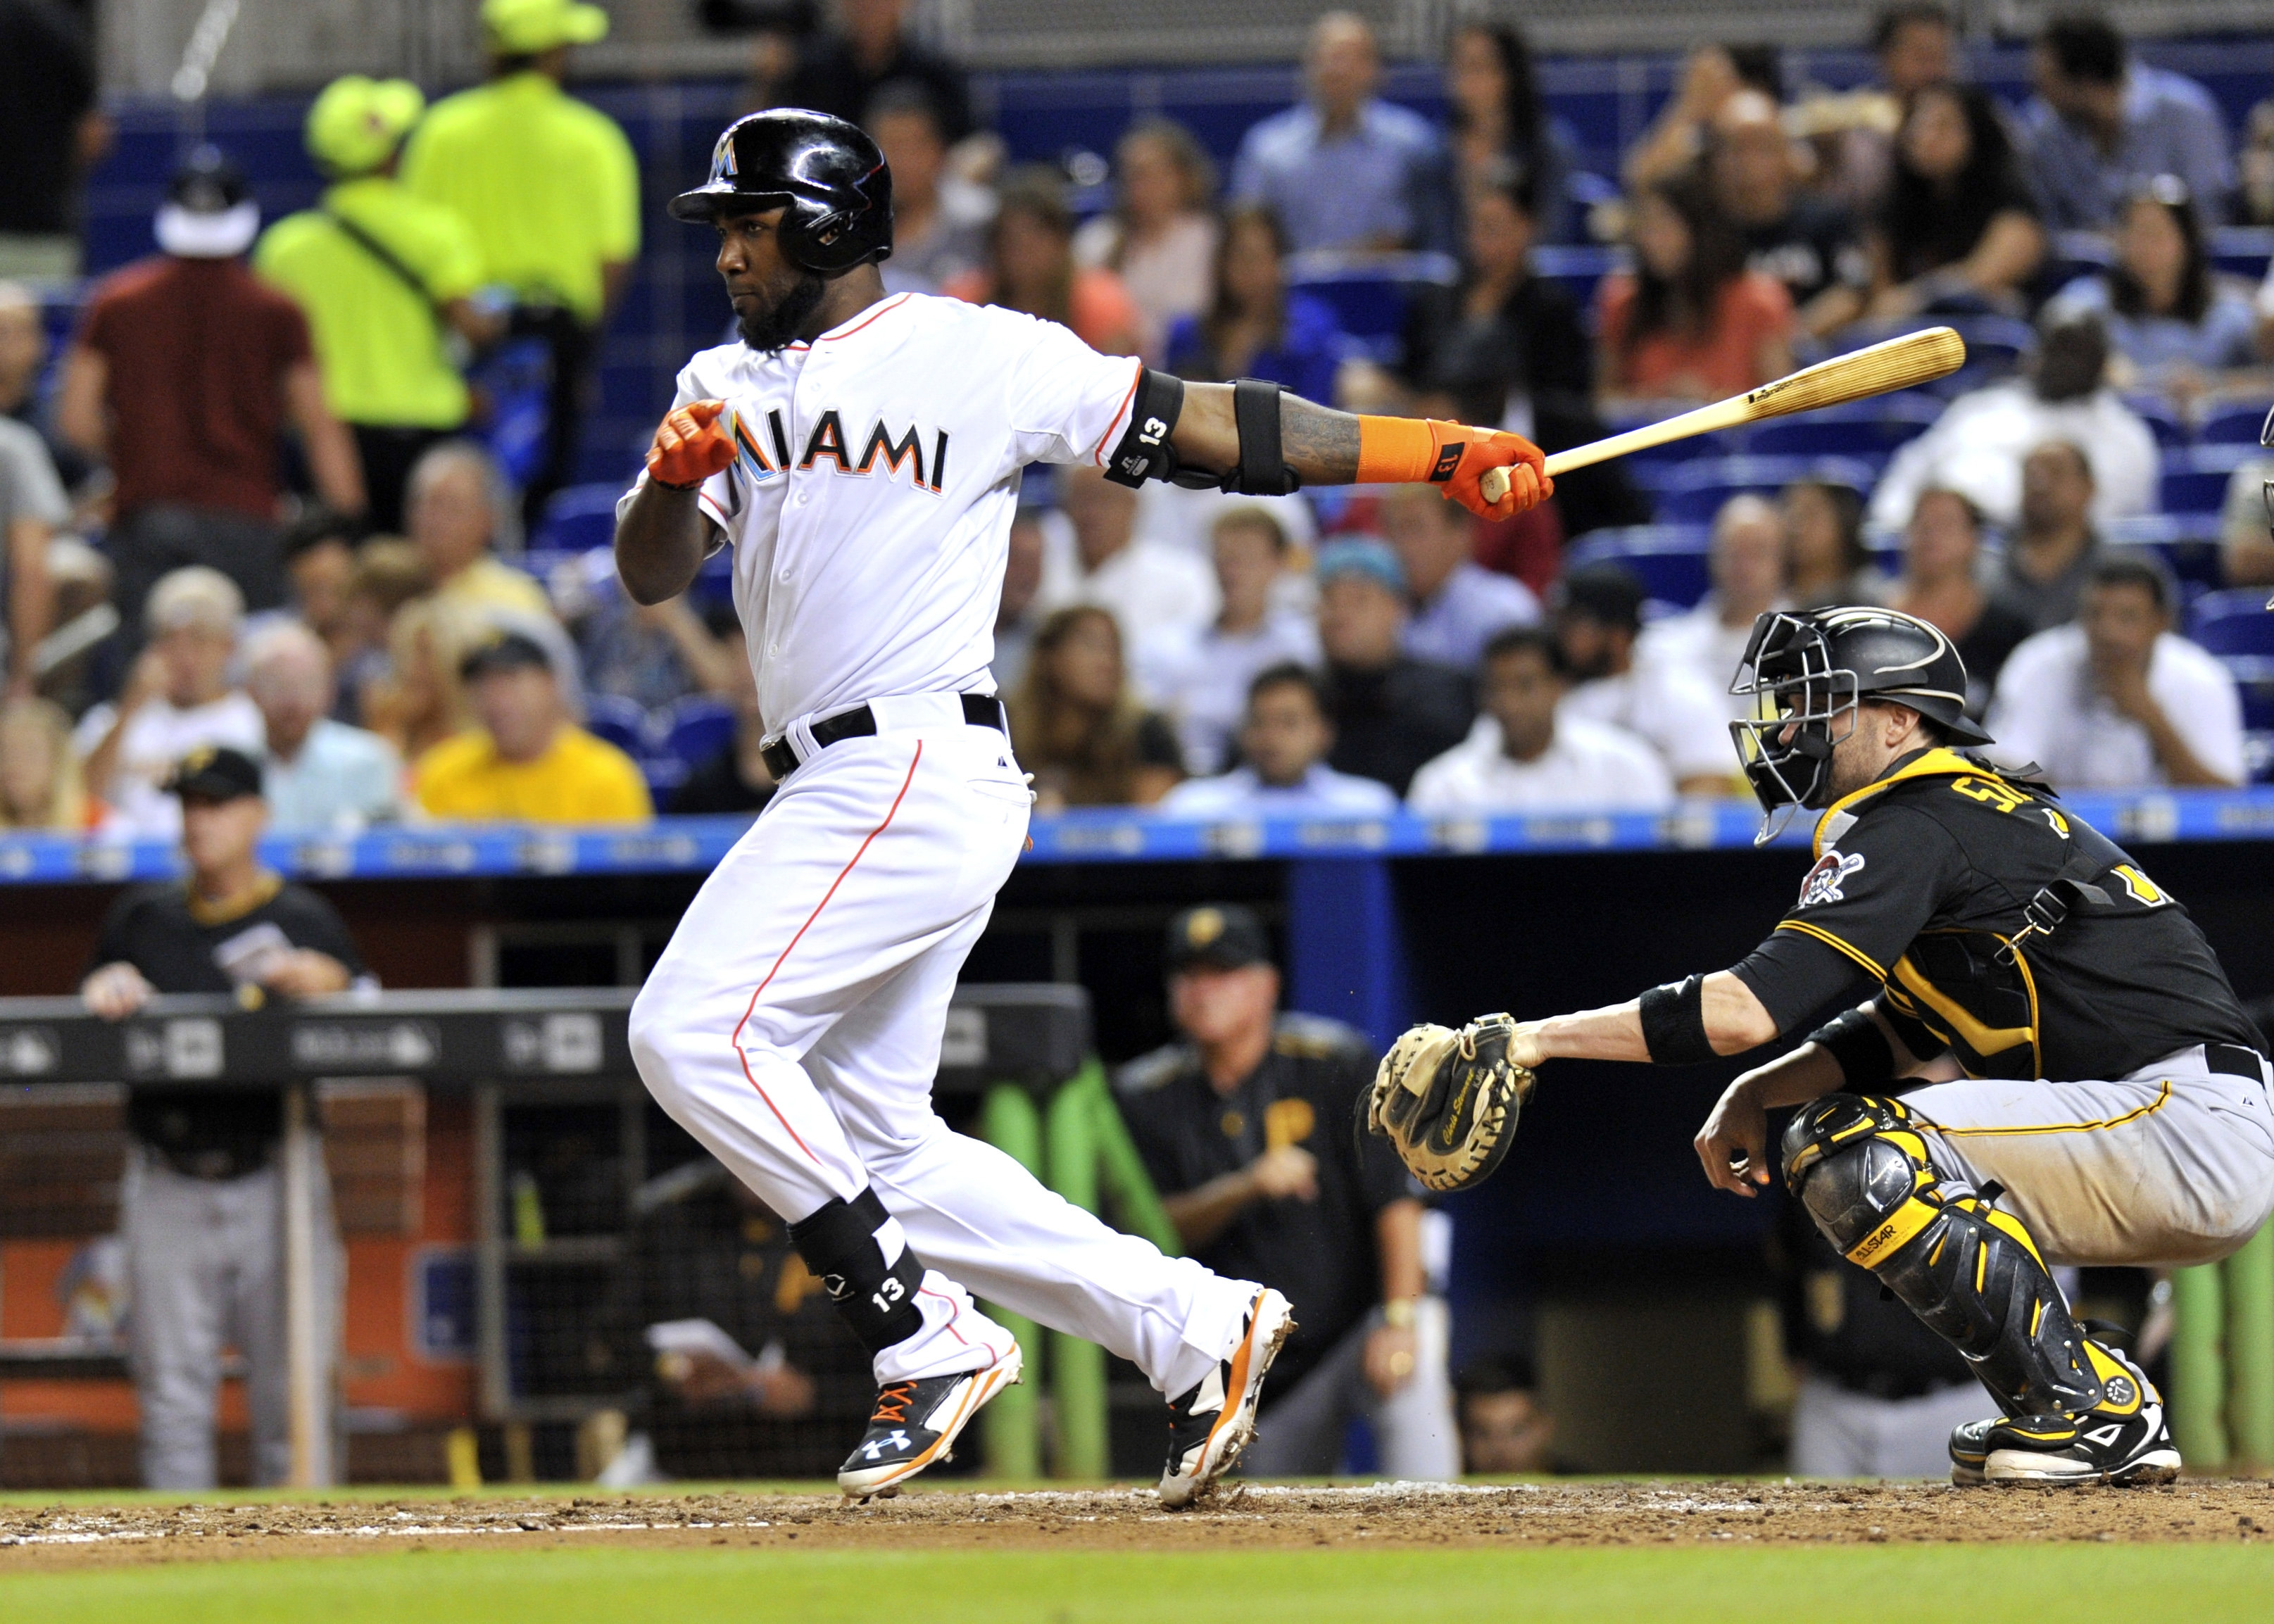 Ozuna returned to the Majors in August hitting just as well as in 2014, with improved peripherals.